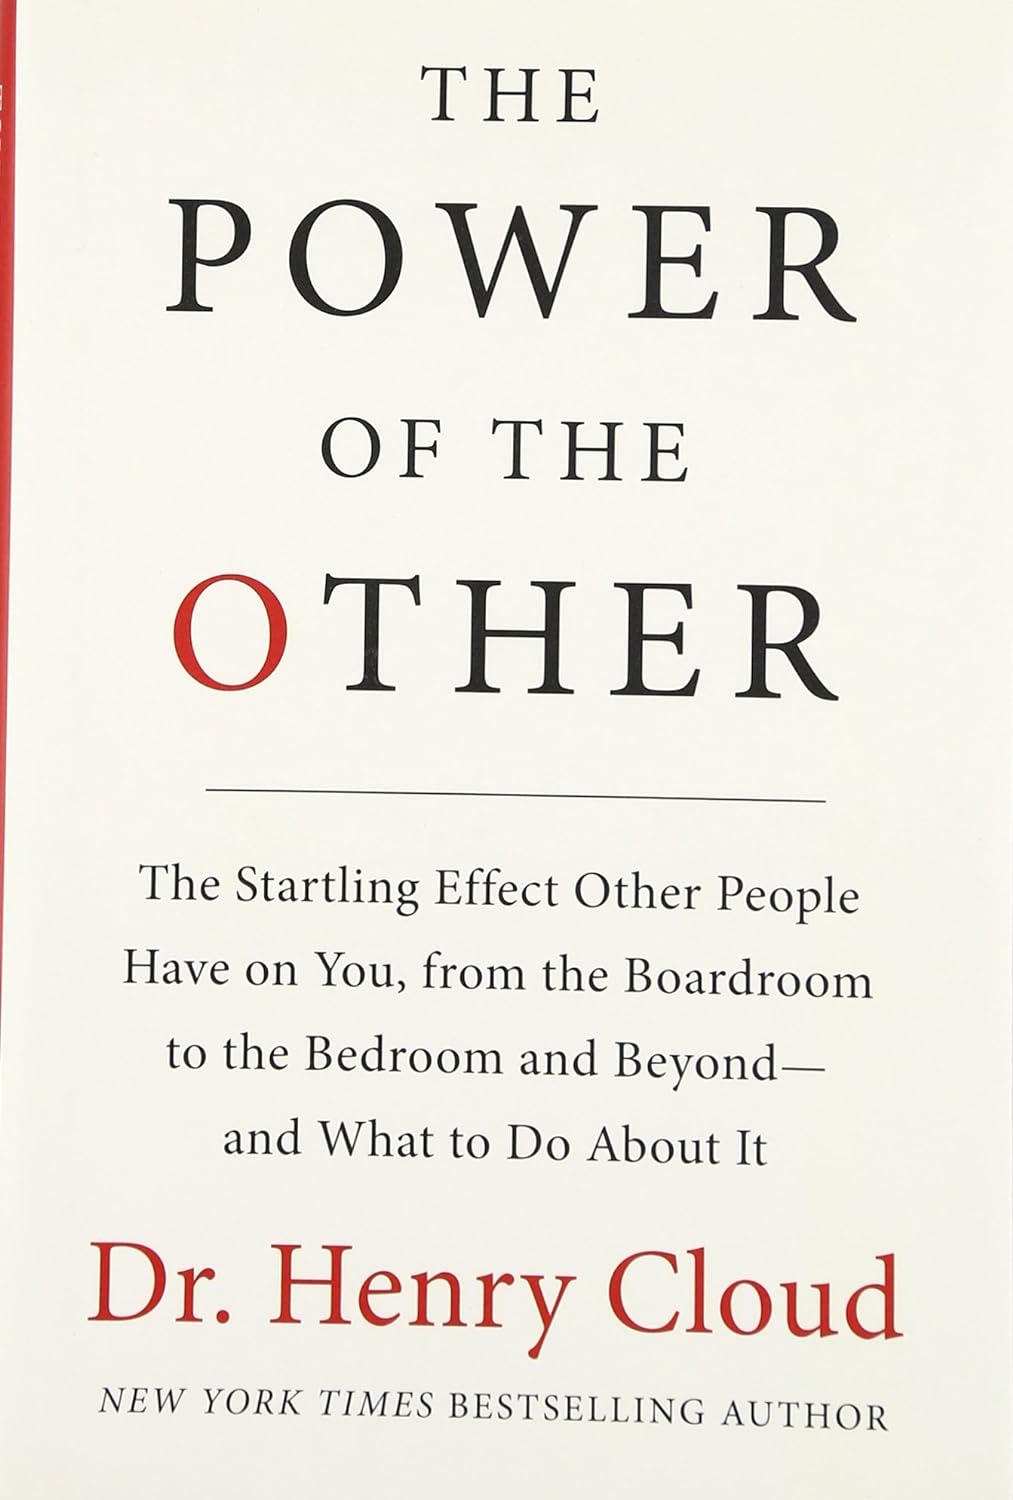 Dr. Henry Cloud - The Power of the Other. The startling effect other people have on you, from the boardroom to the bedroom and beyond-and what to do about it